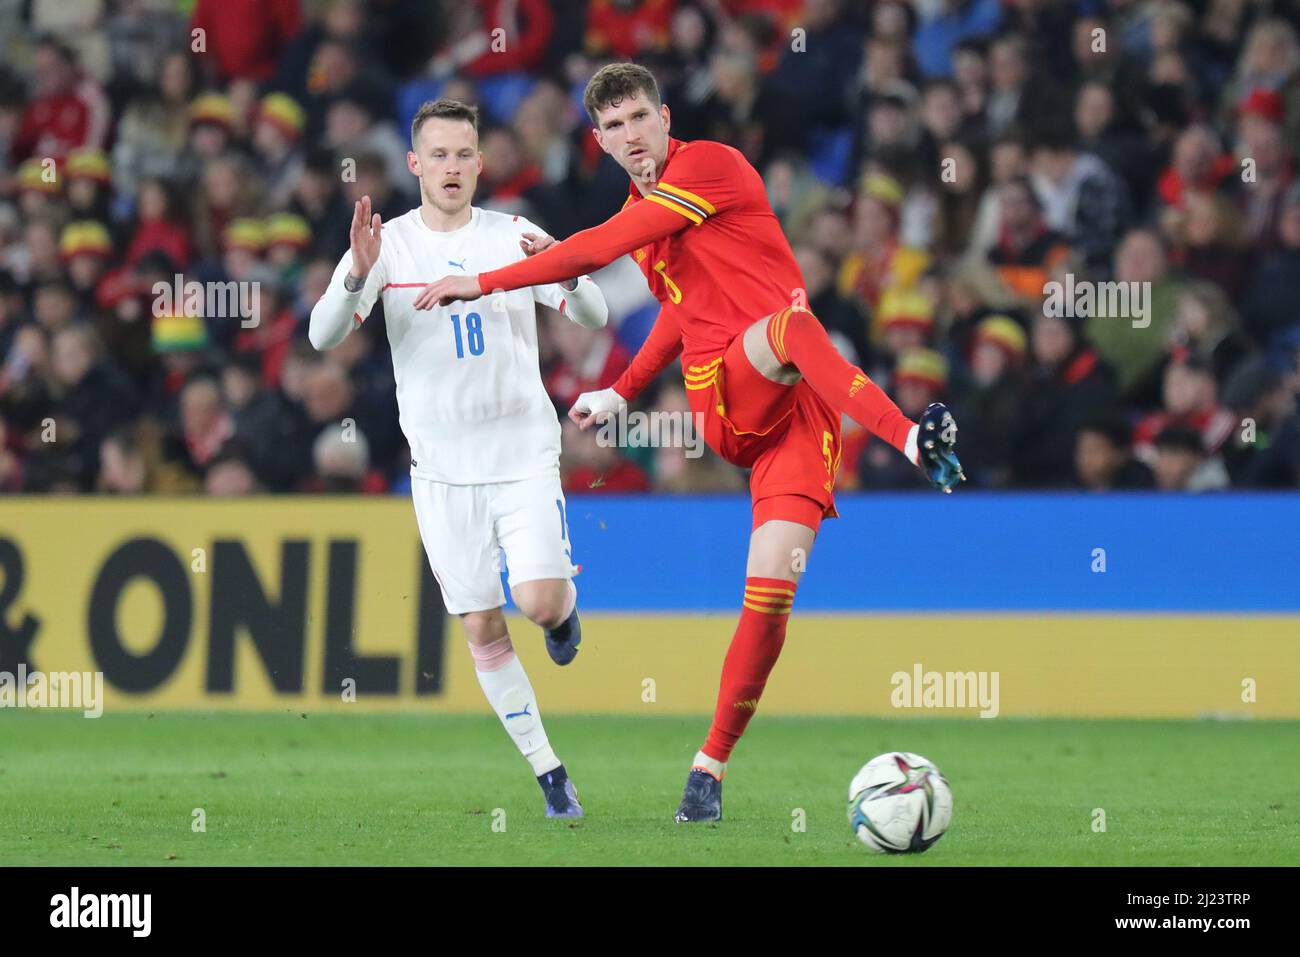 Cardiff, Wales, UK. 29th Mar, 2022. Jan Sykora of Czech Republic and Chris Mepham of Wales during the friendly international between Wales and Czech Republic in aid of the Ukraine humanitarian appeal at the Cardiff City Stadium. Credit: Mark Hawkins/Alamy Live News Stock Photo